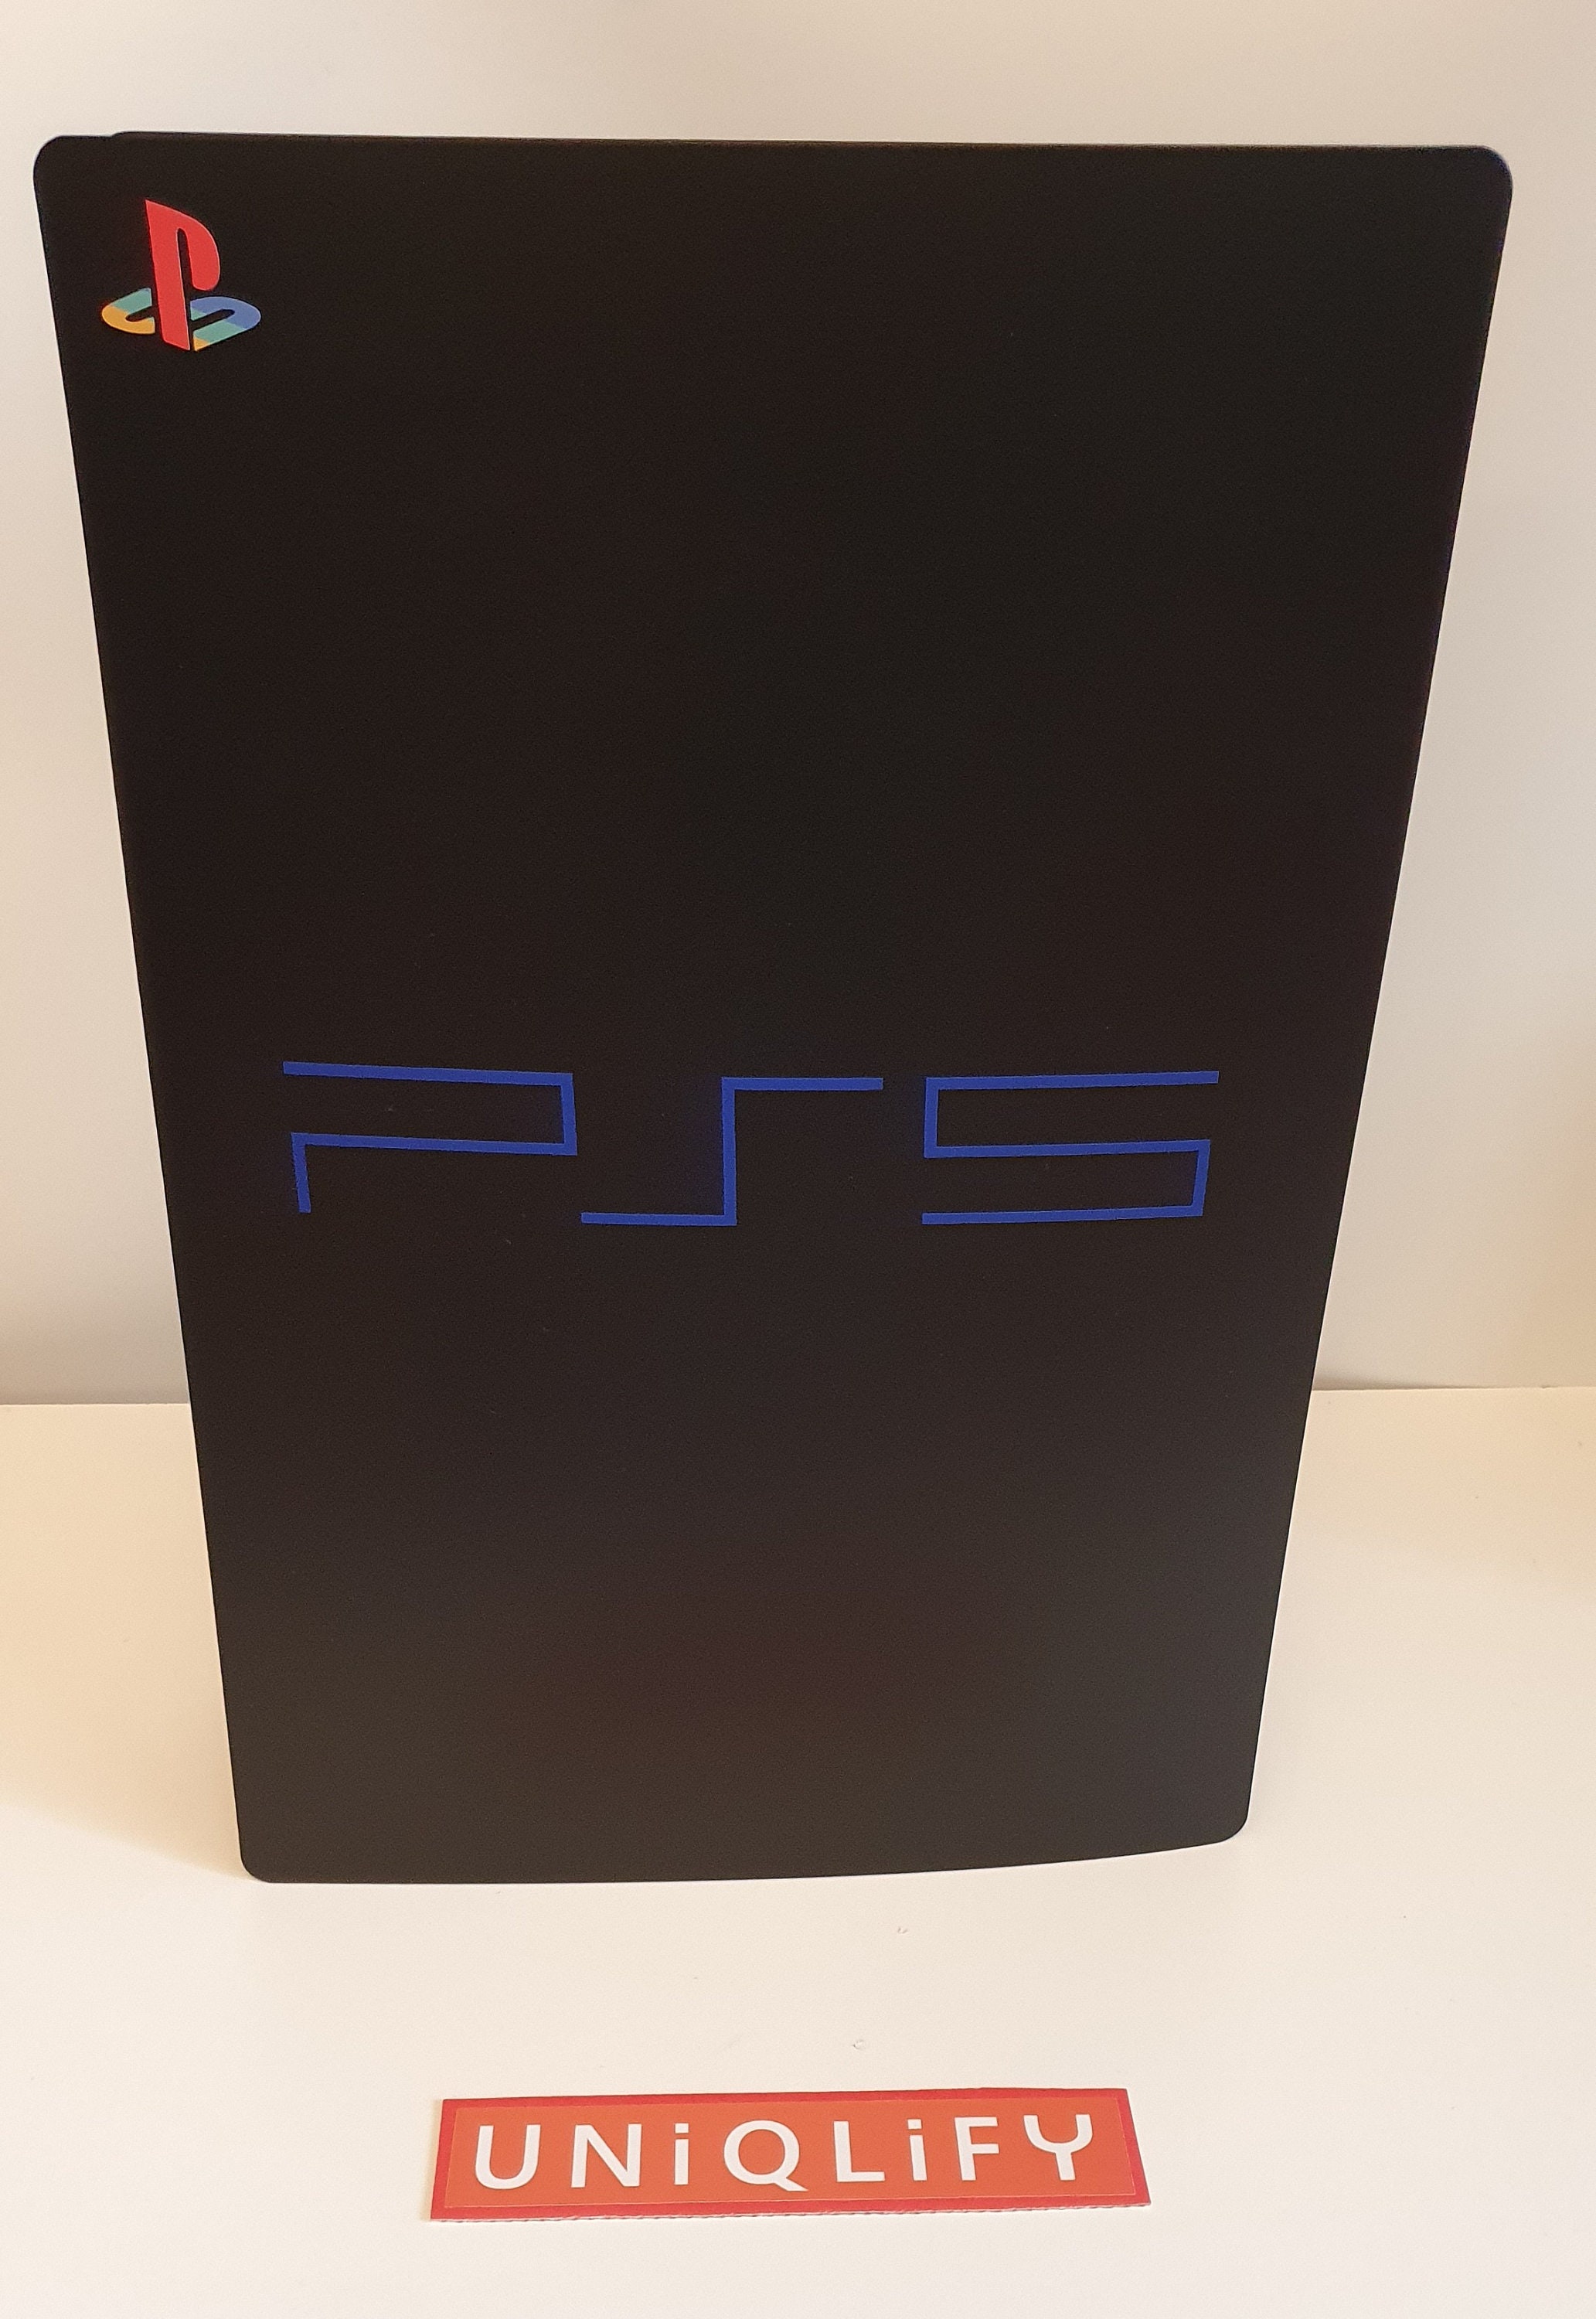 Buy Ps5 Plate Cover Online In India -  India